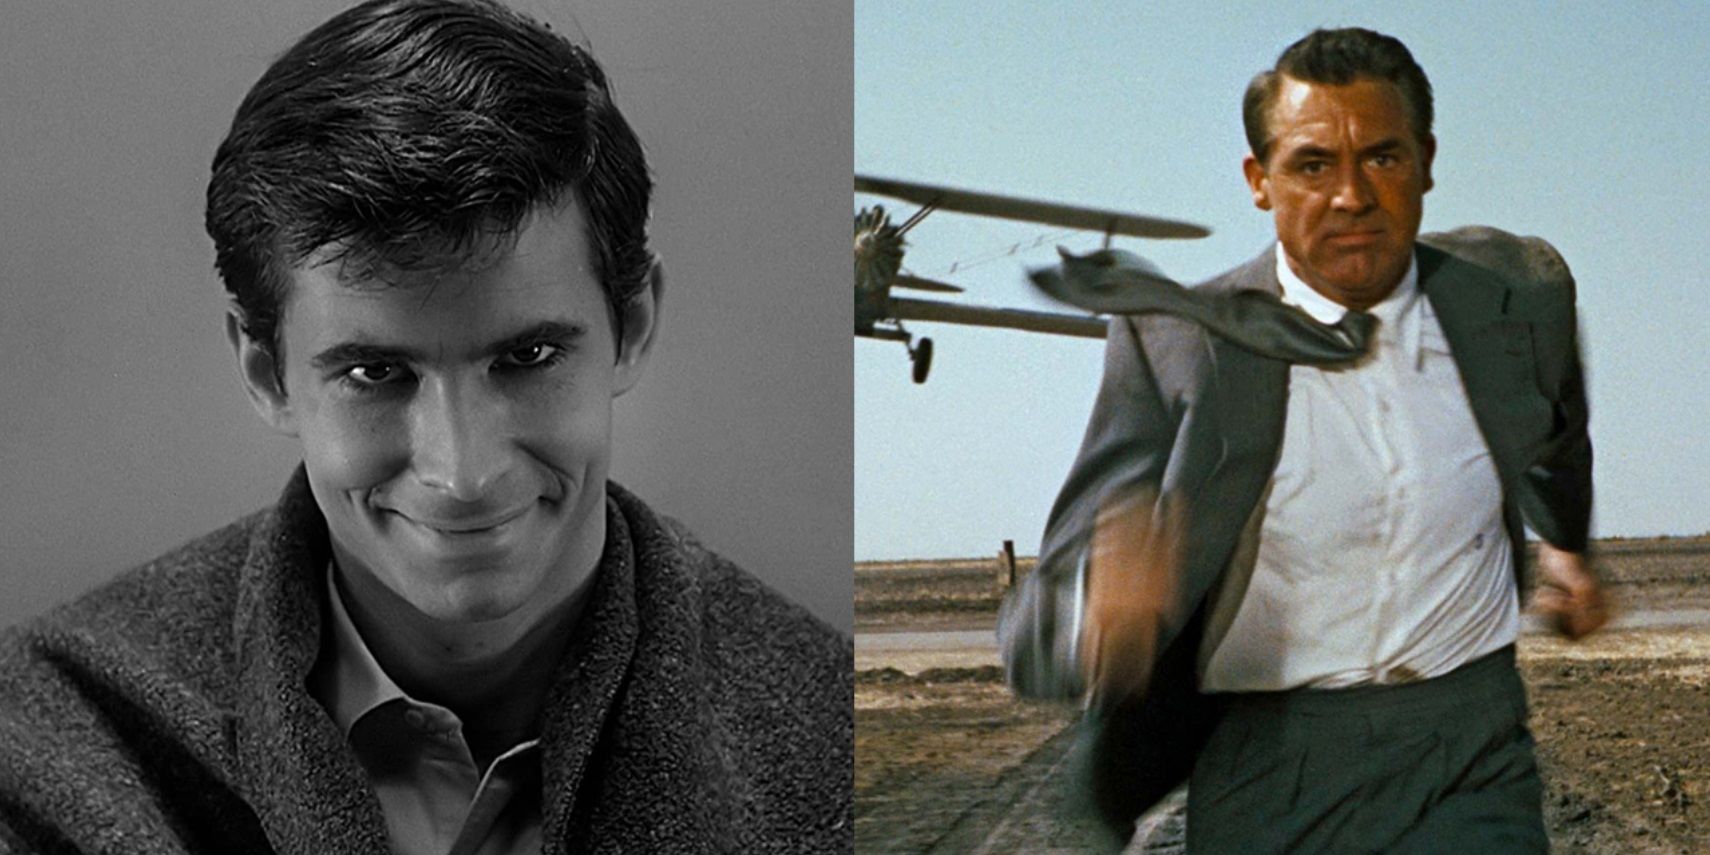 Split image of Anthony Perkins in Psycho and Cary Grant in North by Northwest